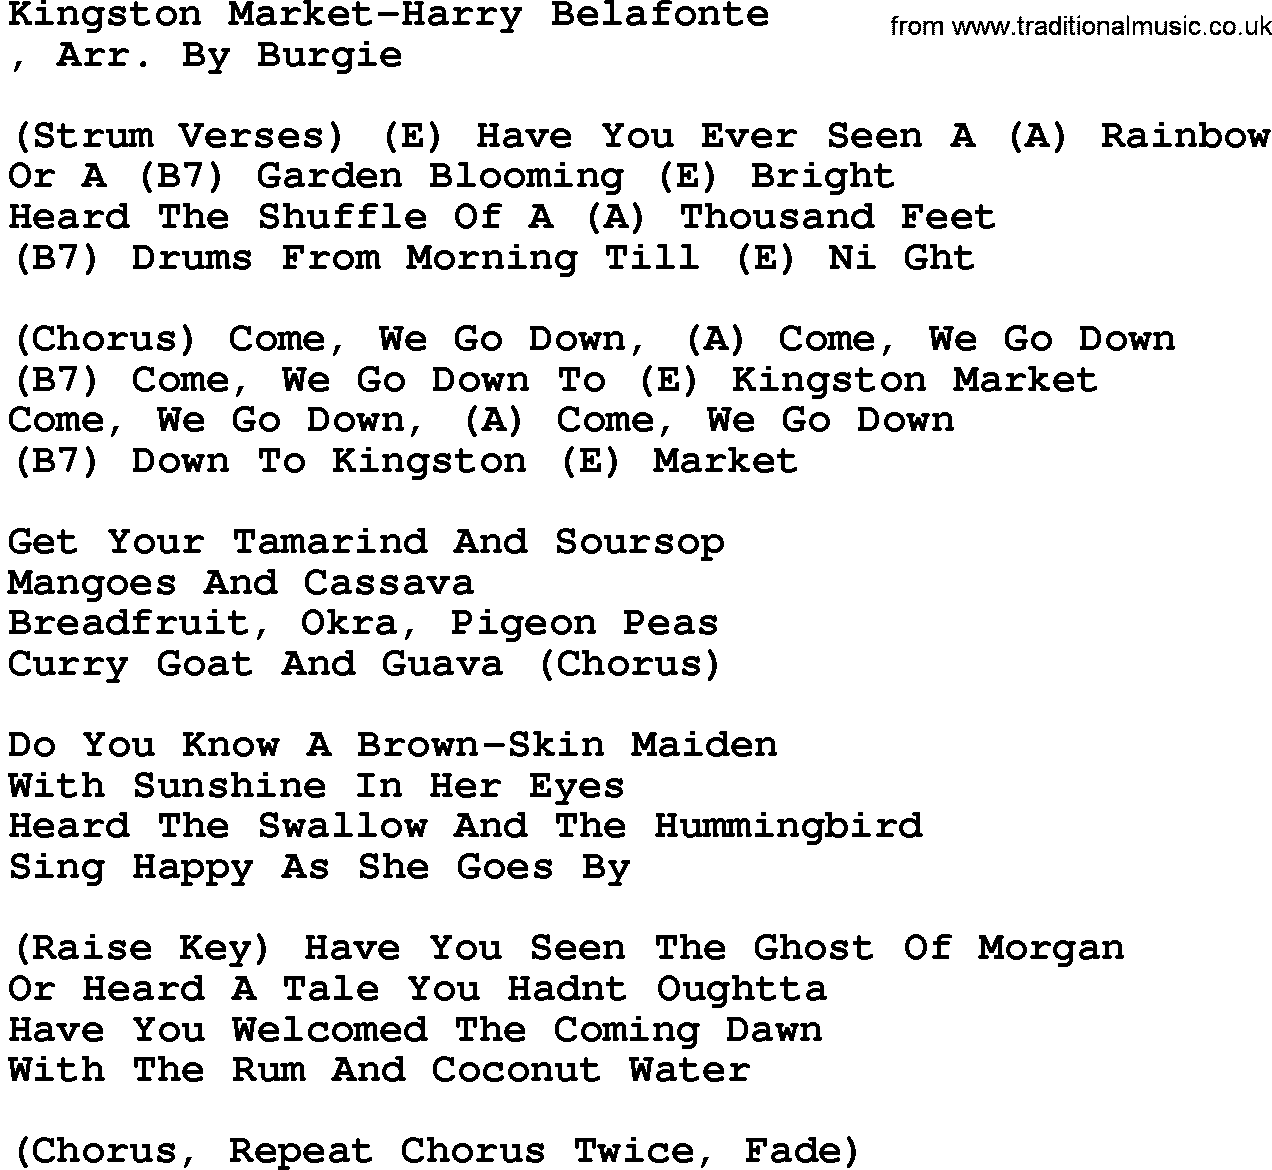 Country music song: Kingston Market-Harry Belafonte lyrics and chords